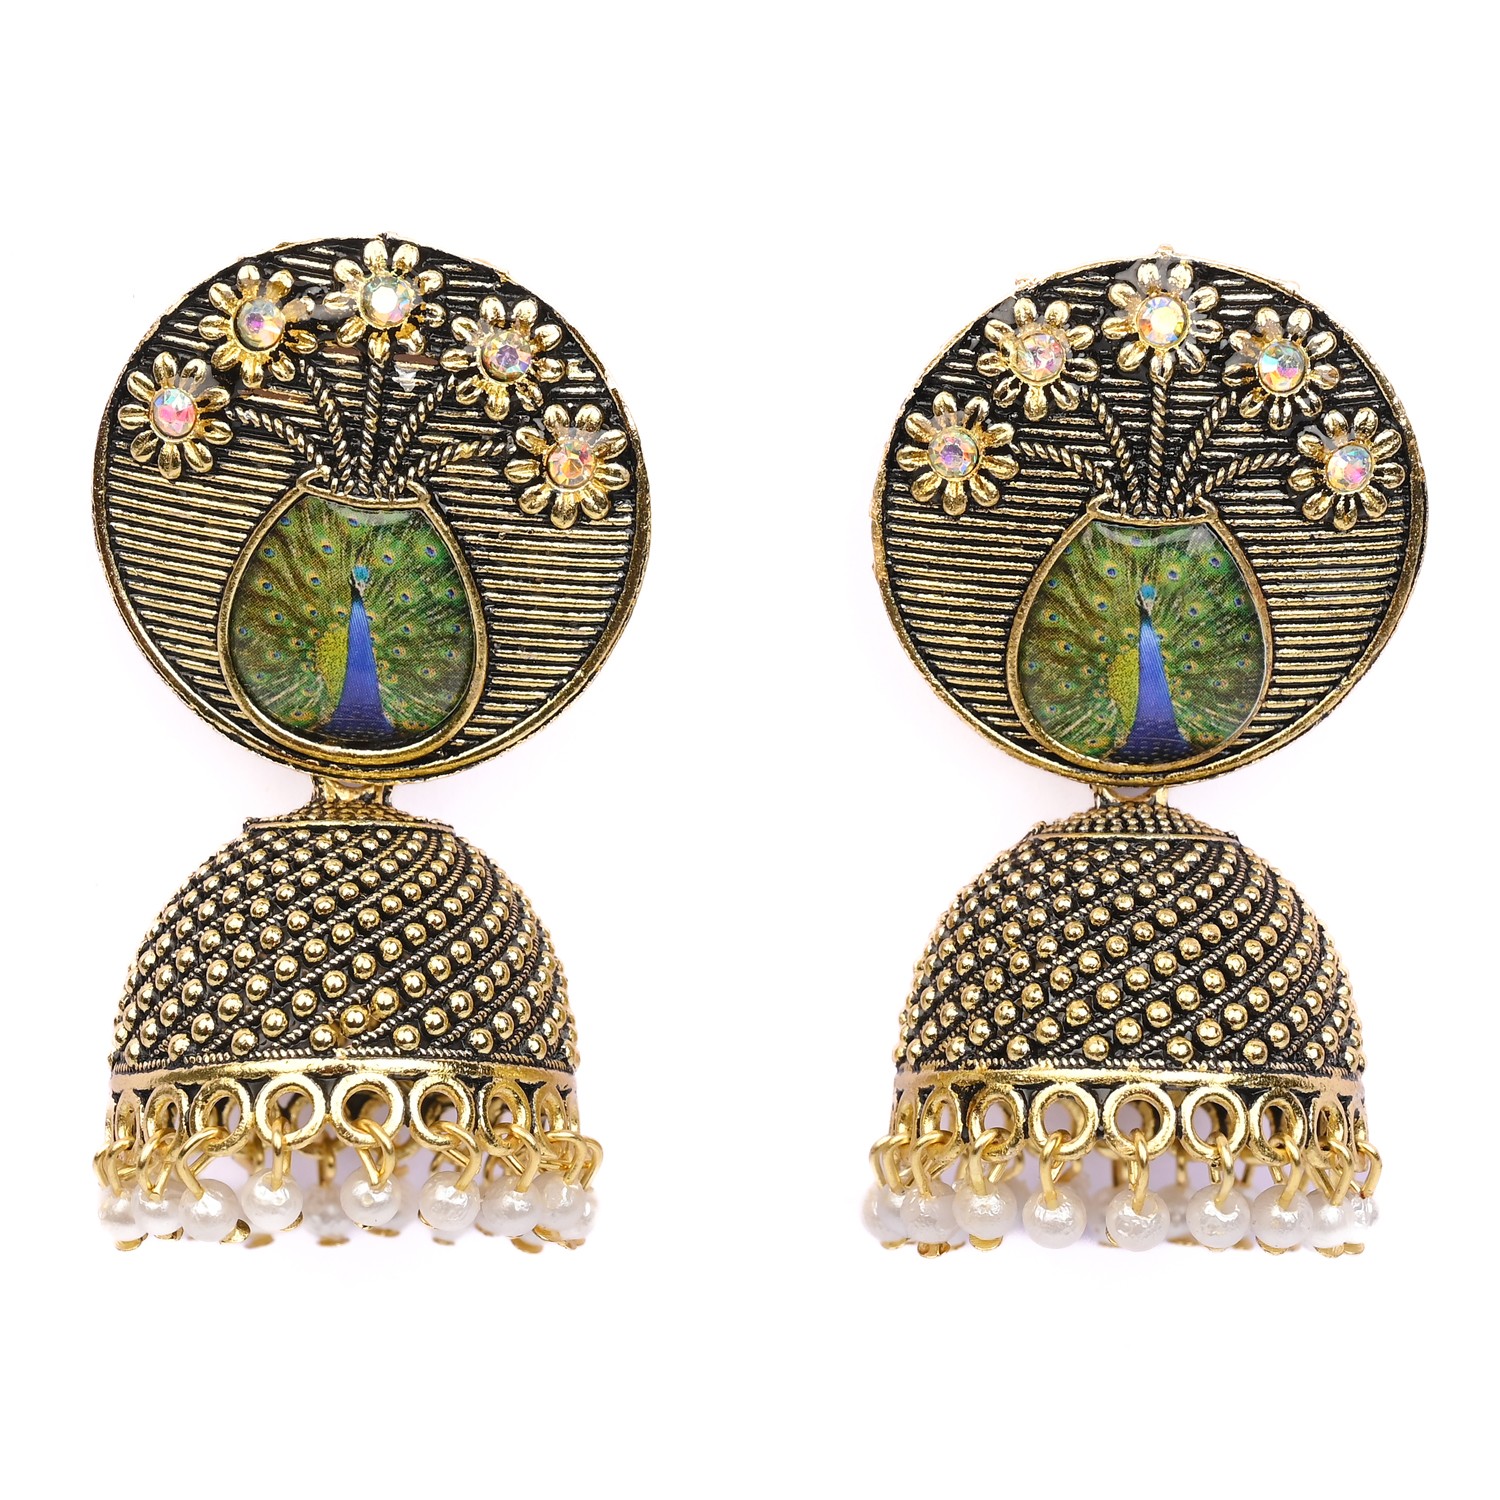 Peacock Design Jumka for Women - Exquisite Ethnic Elegance for All Occasions"